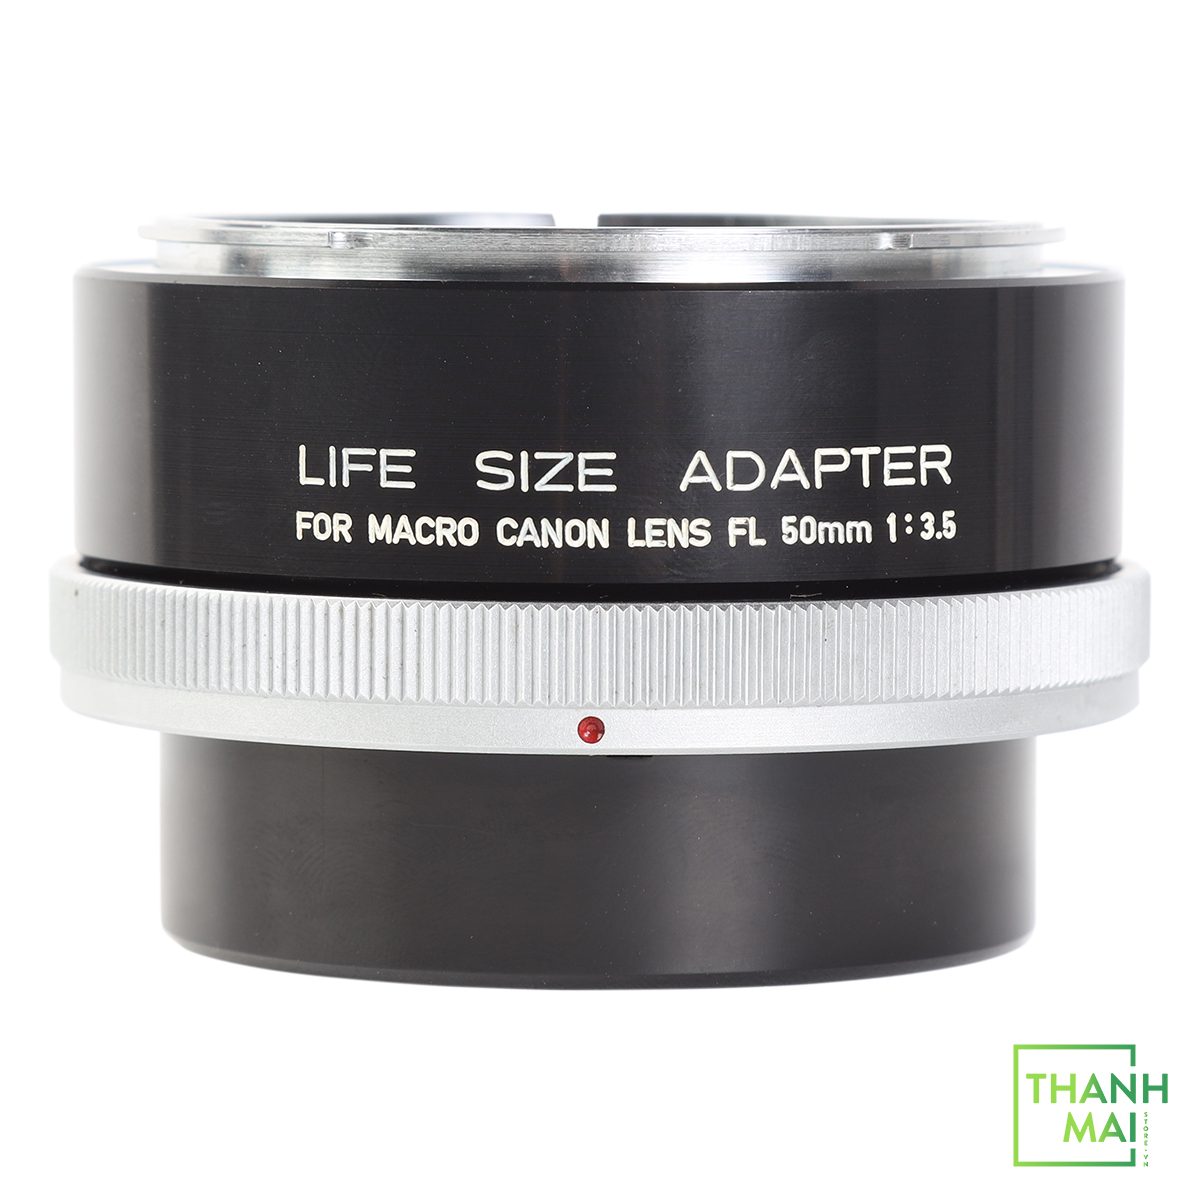 Canon FL Life Size Adapter For 50mm F 3.5 Canon Macro